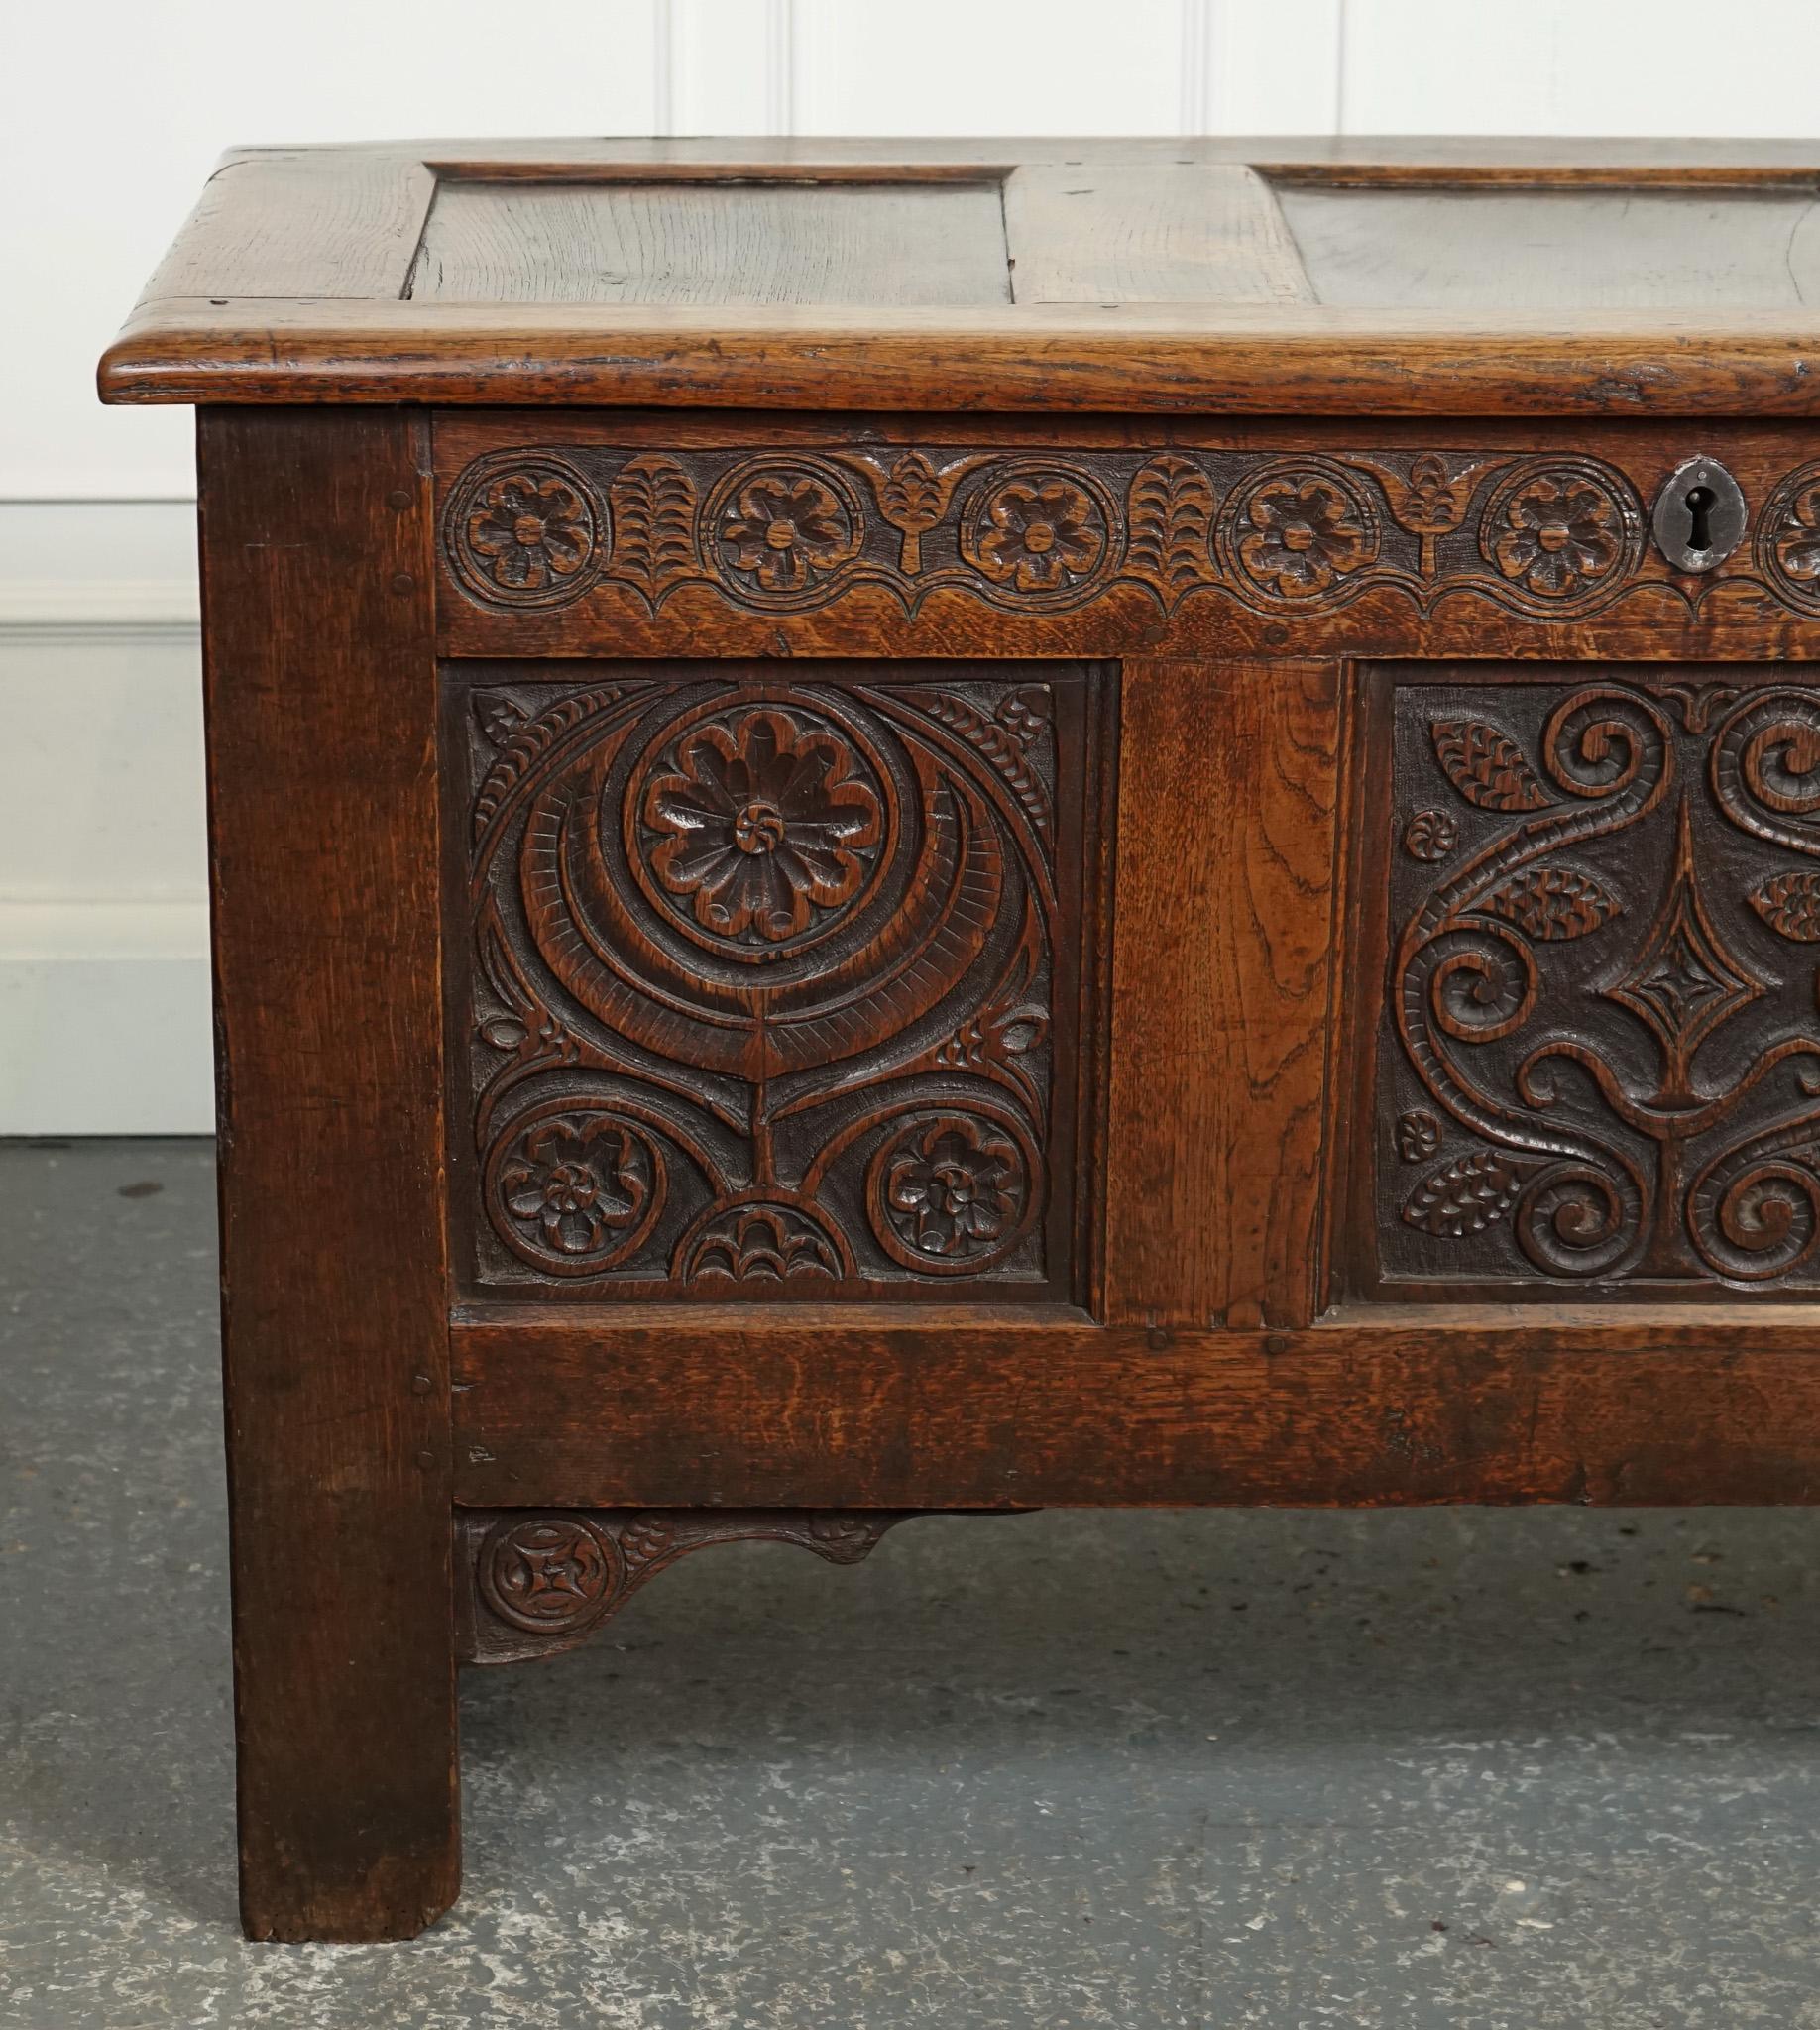 LOVELY 17TH CENTURY CARVED ANTIQUE OAK TRUNK CHEST COFFER j1 For Sale 2